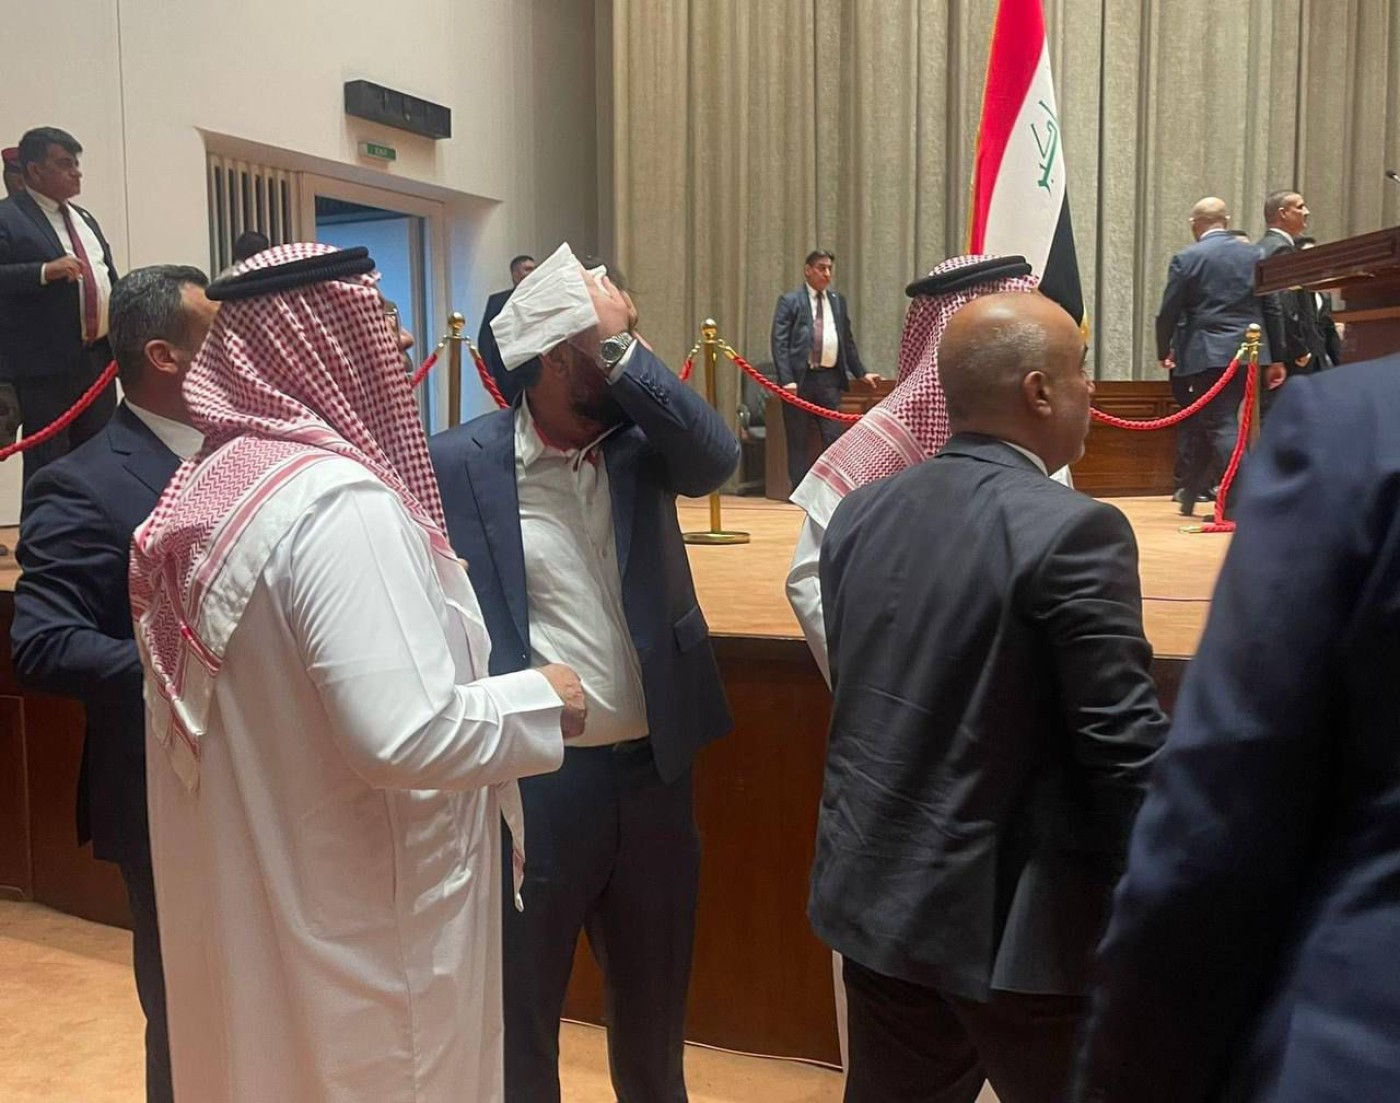 Iraq fails to elect new parliament speaker, session ends in brawl